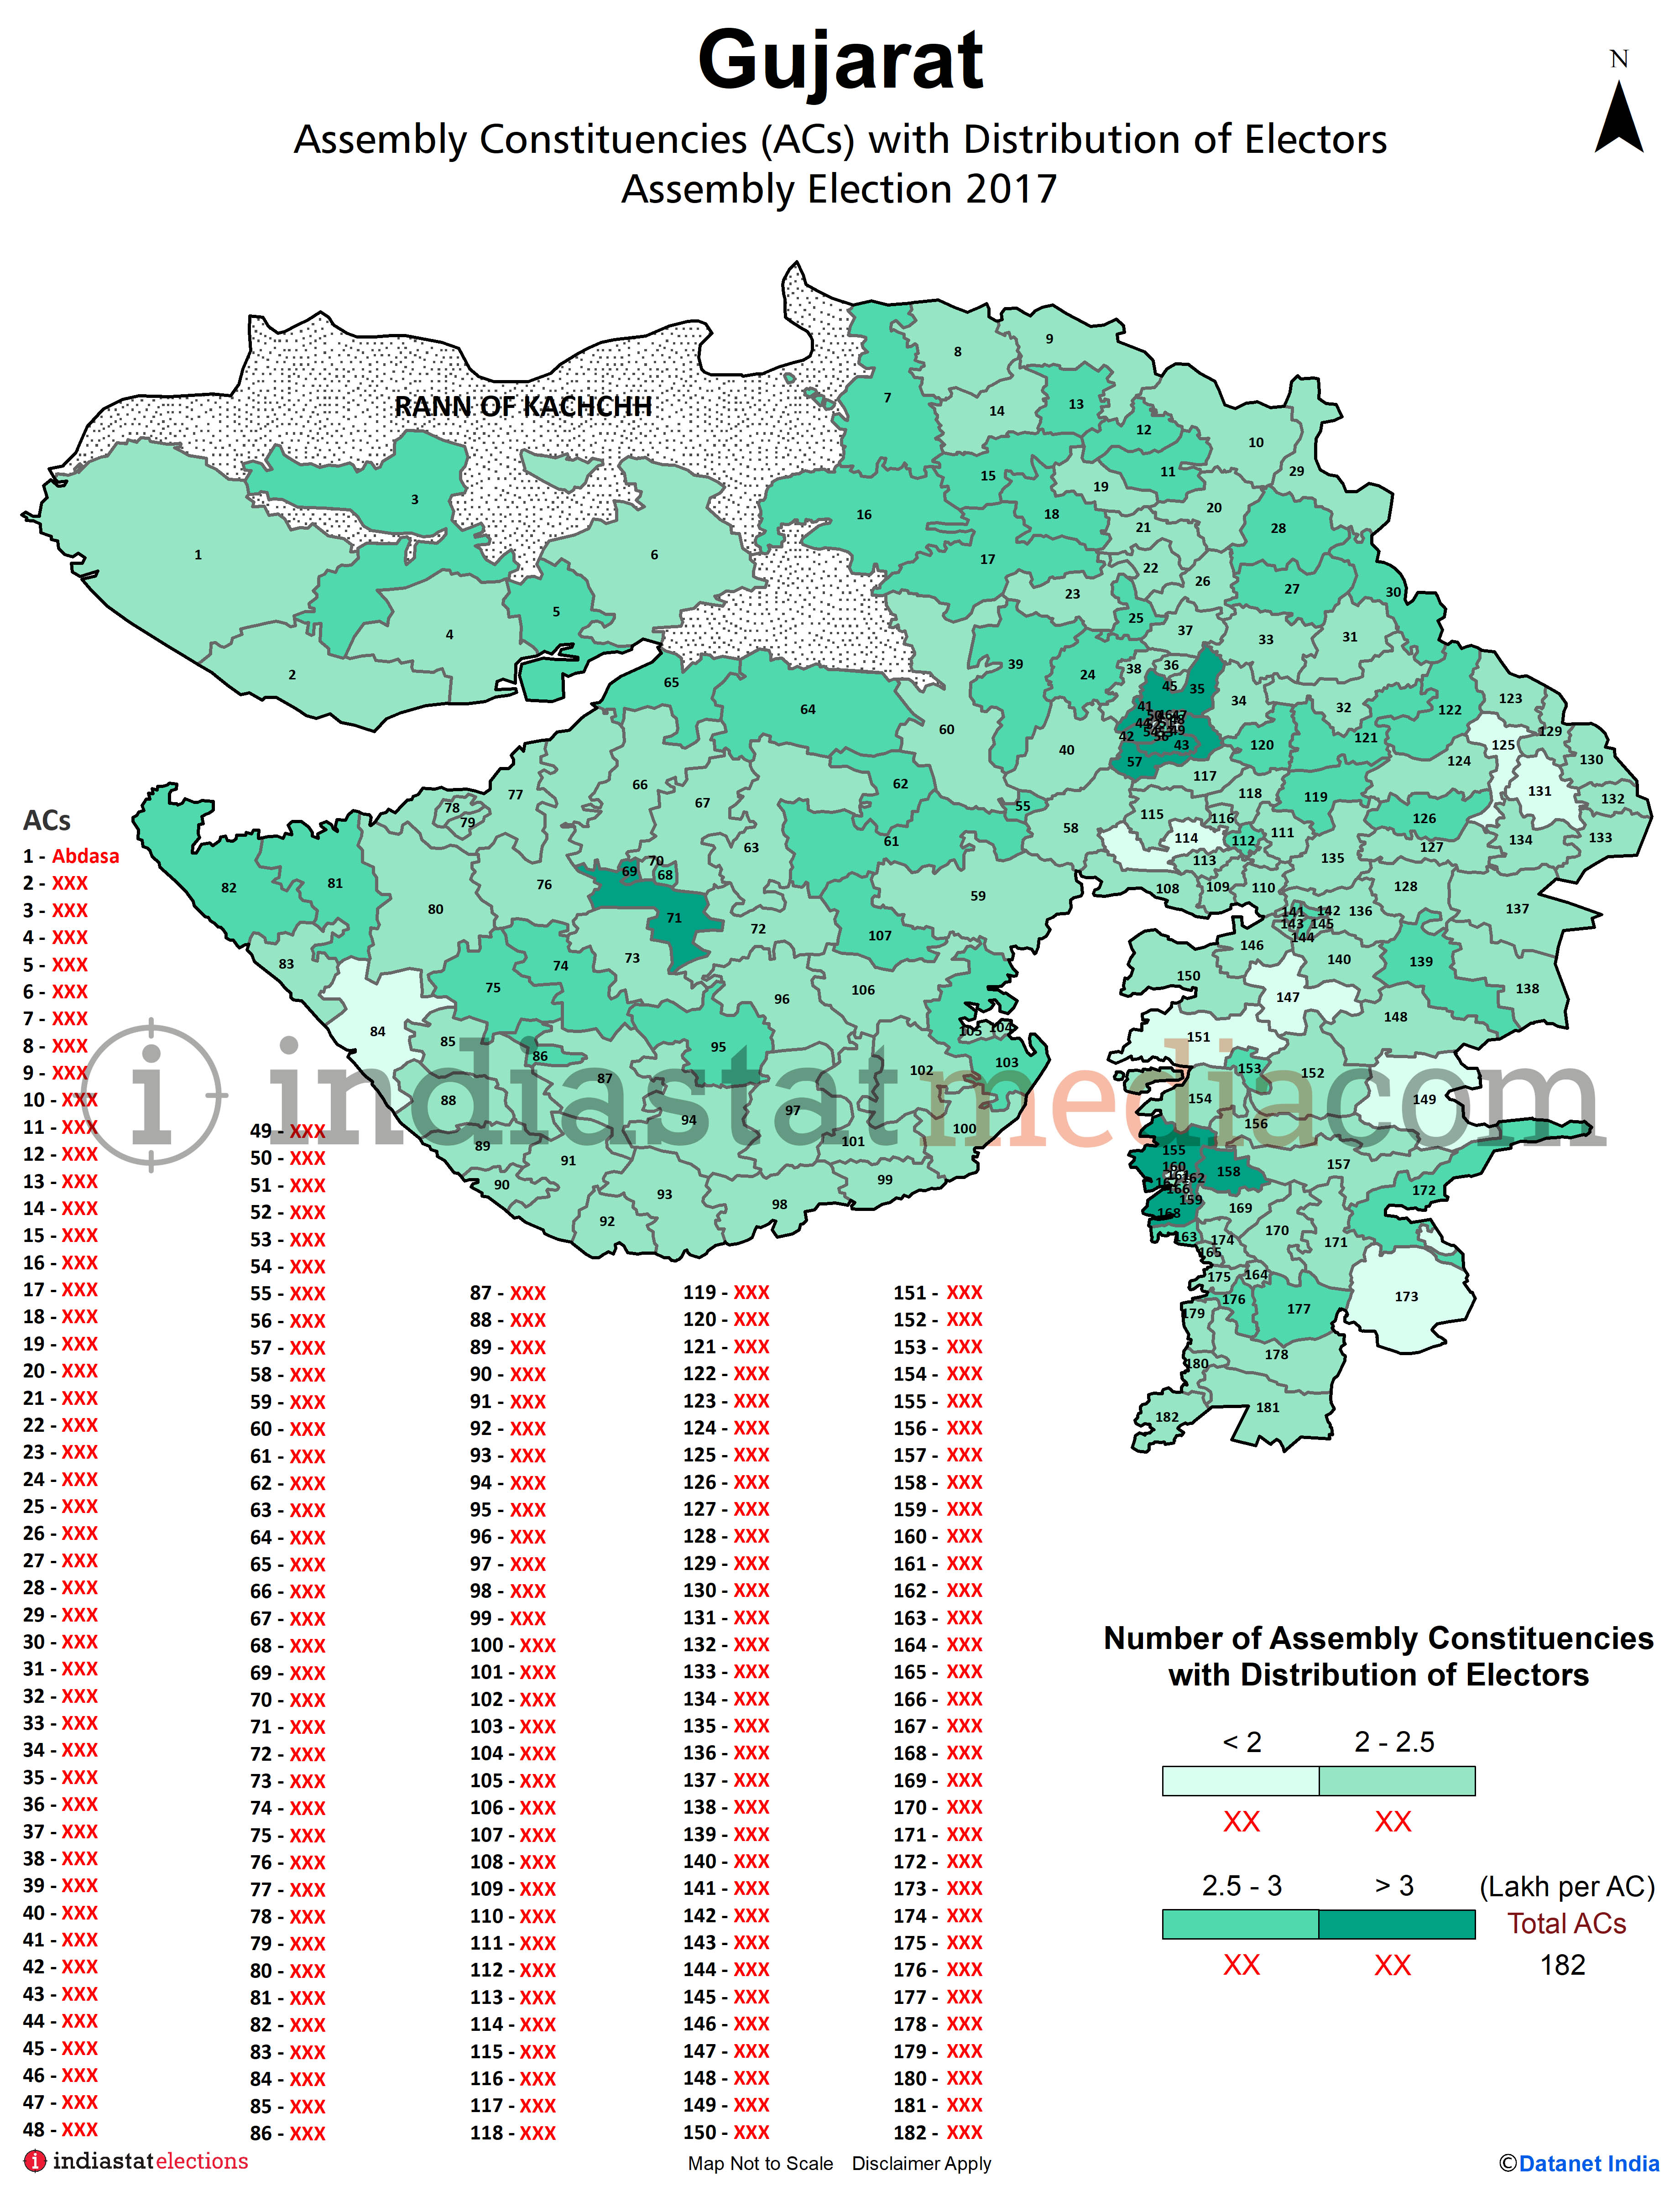 Assembly Constituencies (ACs) with Distribution of Electors in Gujarat (Assembly Election - 2017)